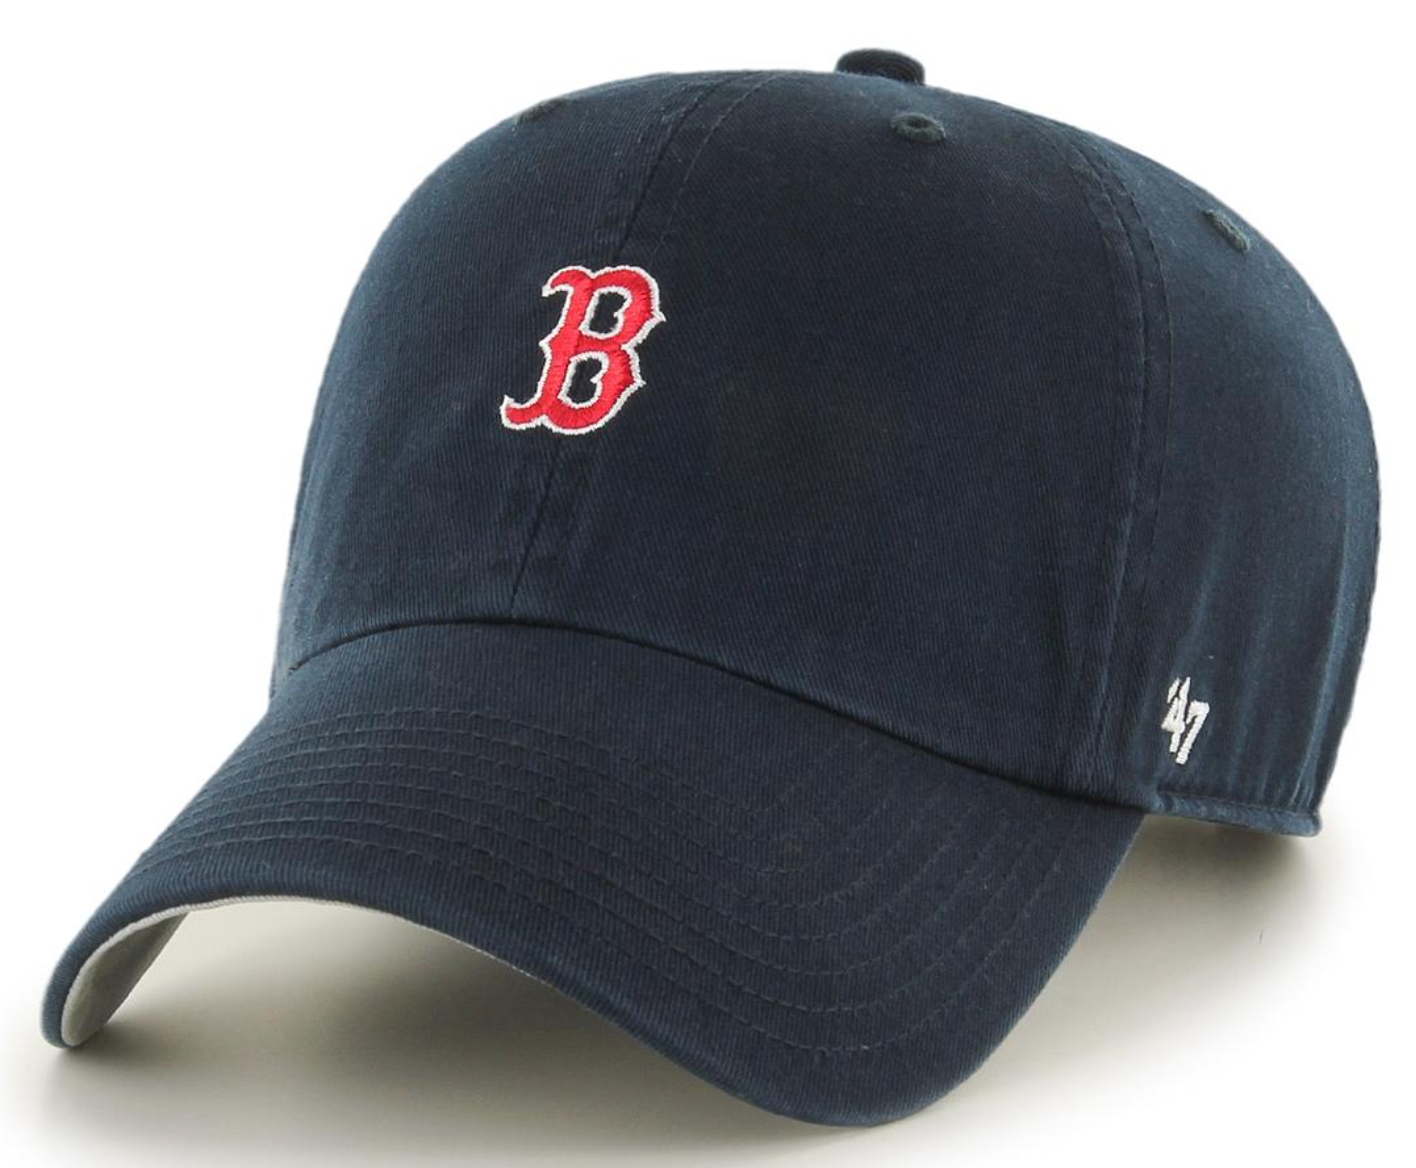 '47 Brand Unisex Boston Red Sox Clean Up Cap - Navy